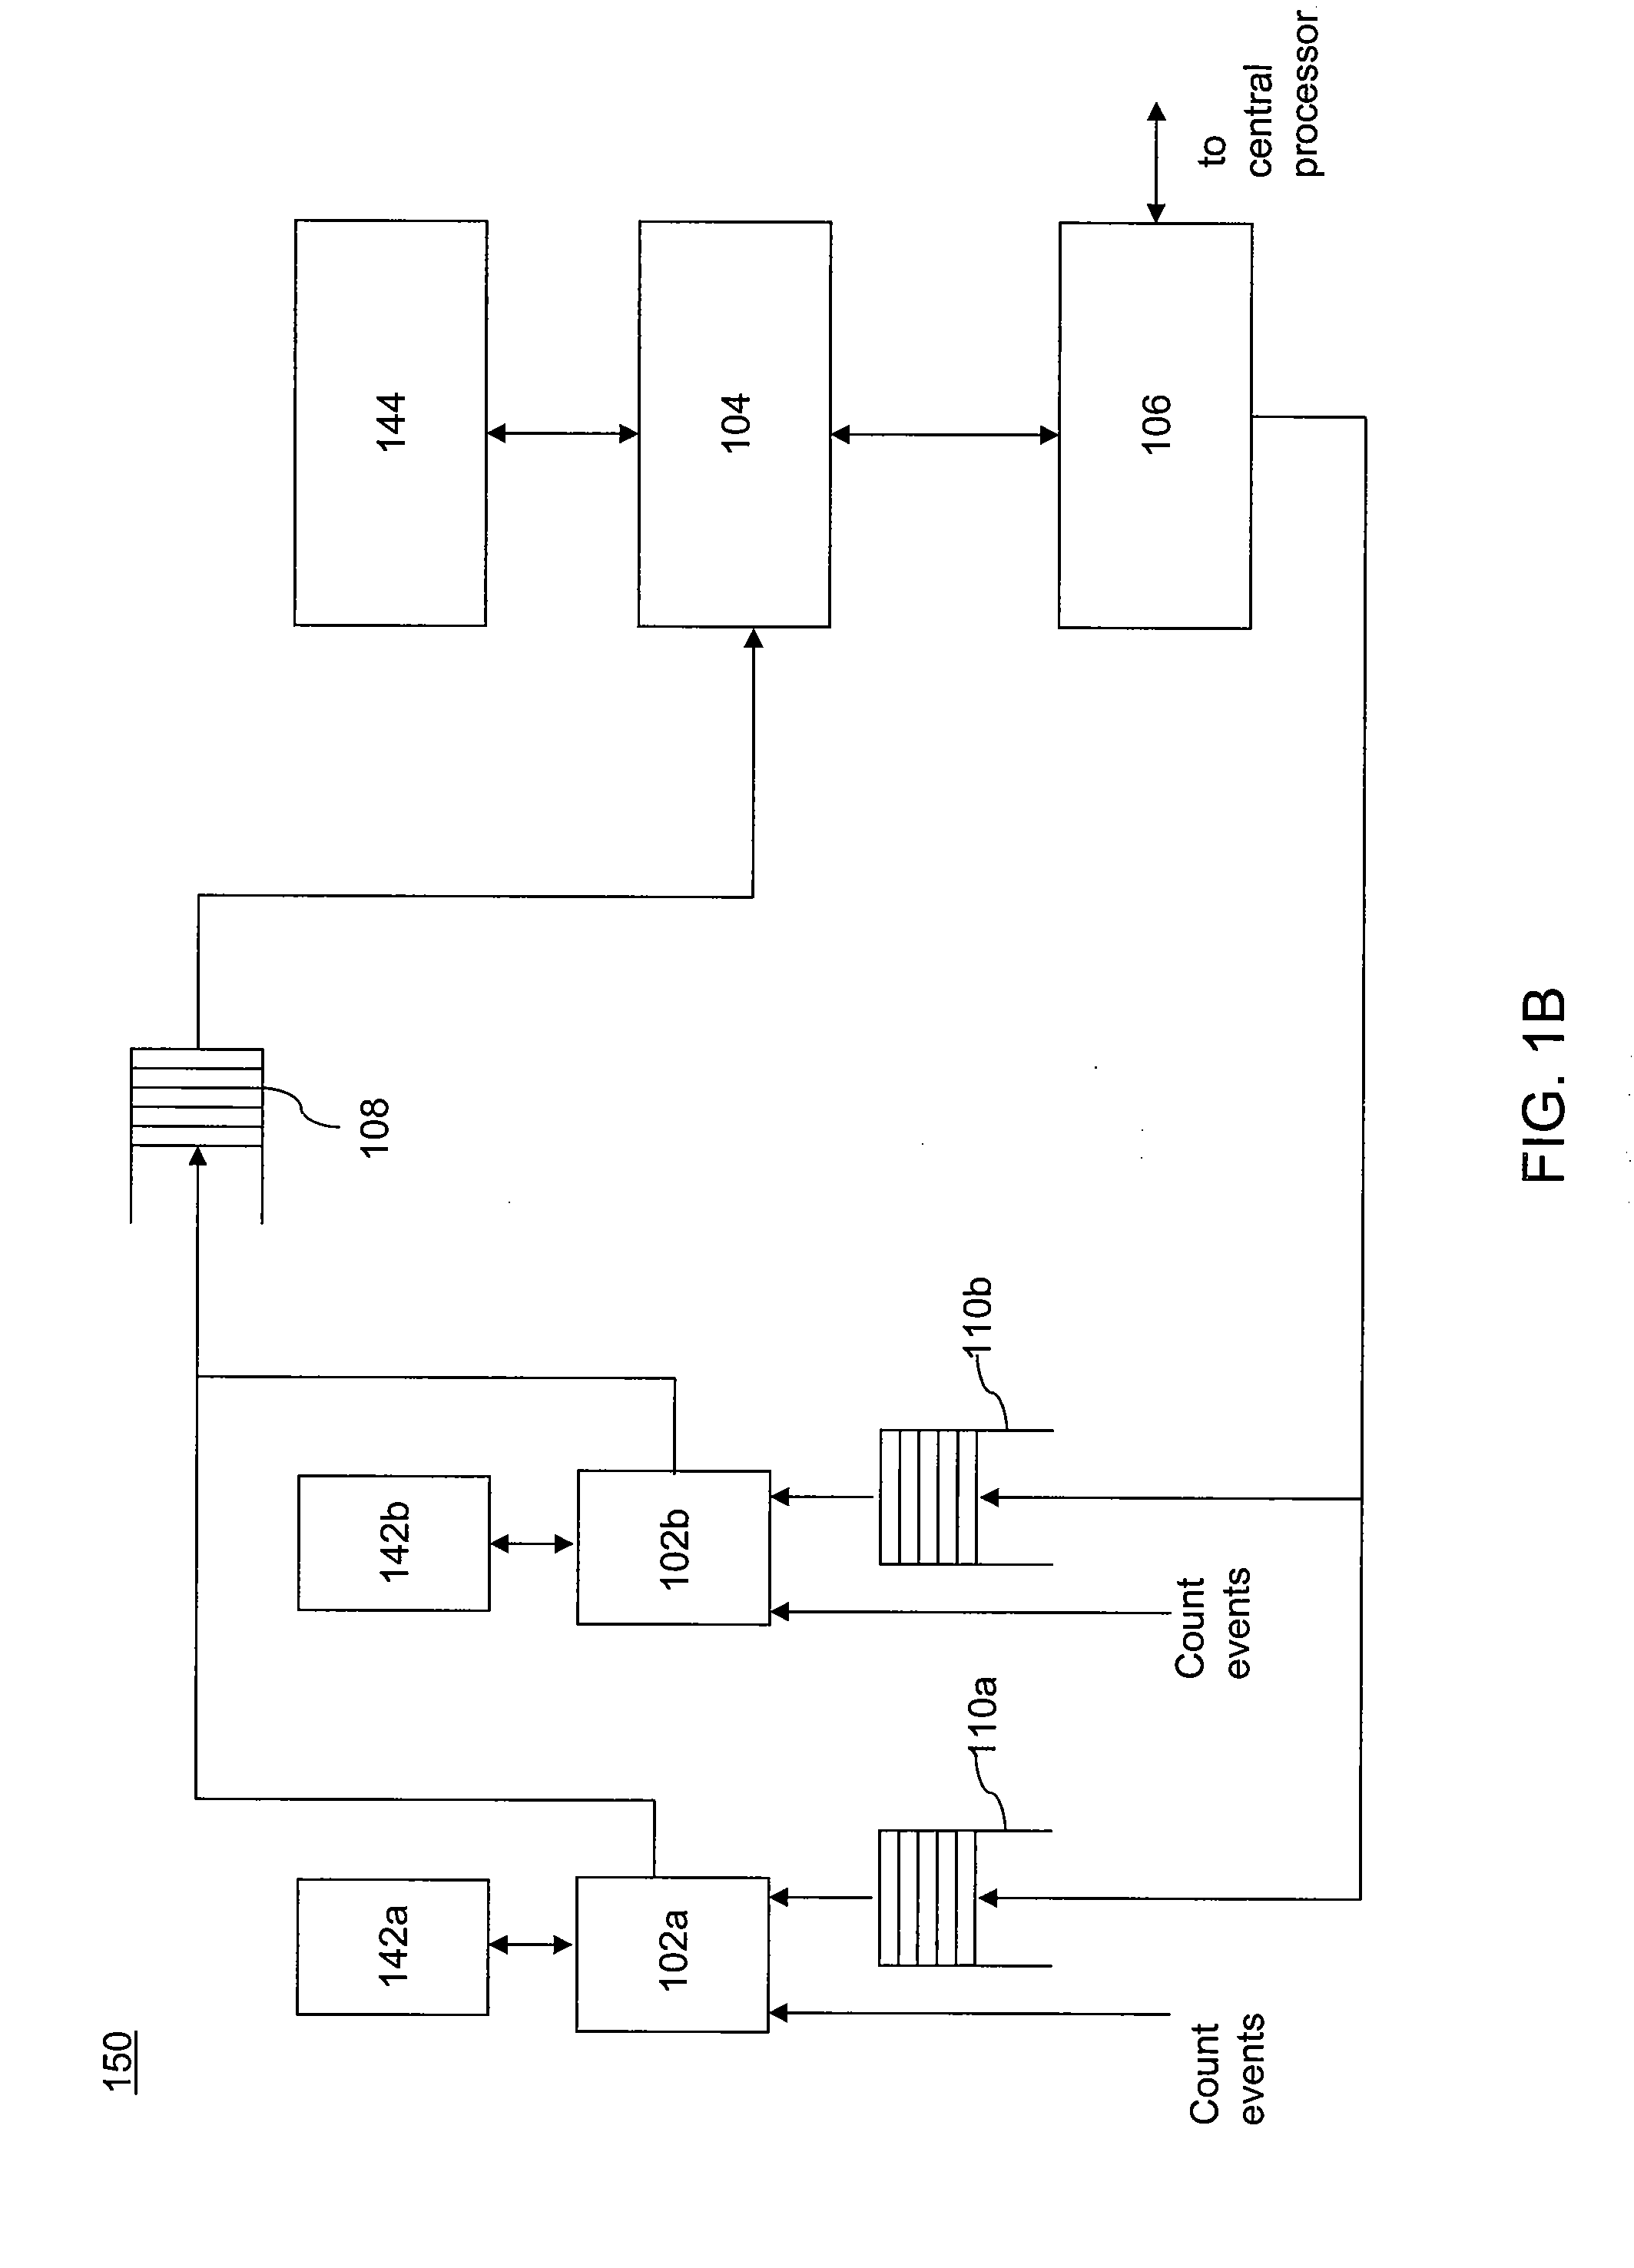 System and Method for Managing Counters